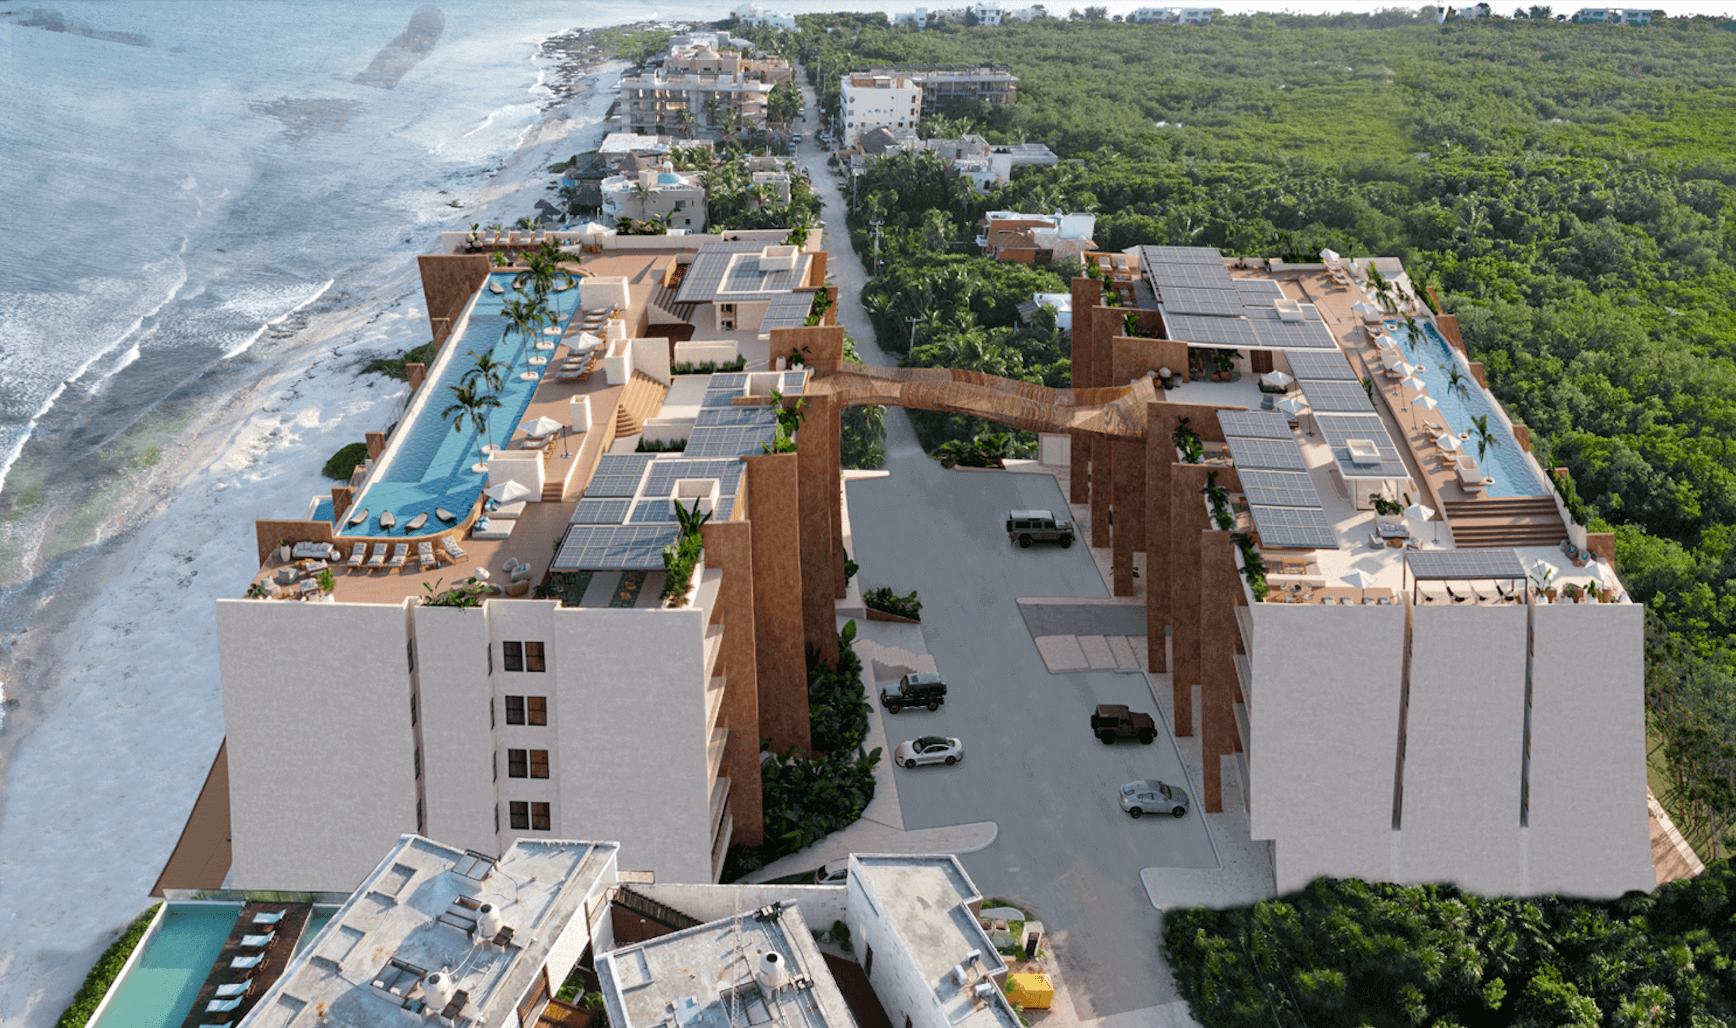 Condominium for sale with yoga area, beach club, restaurant, concierge, surrounded by green in Tulum